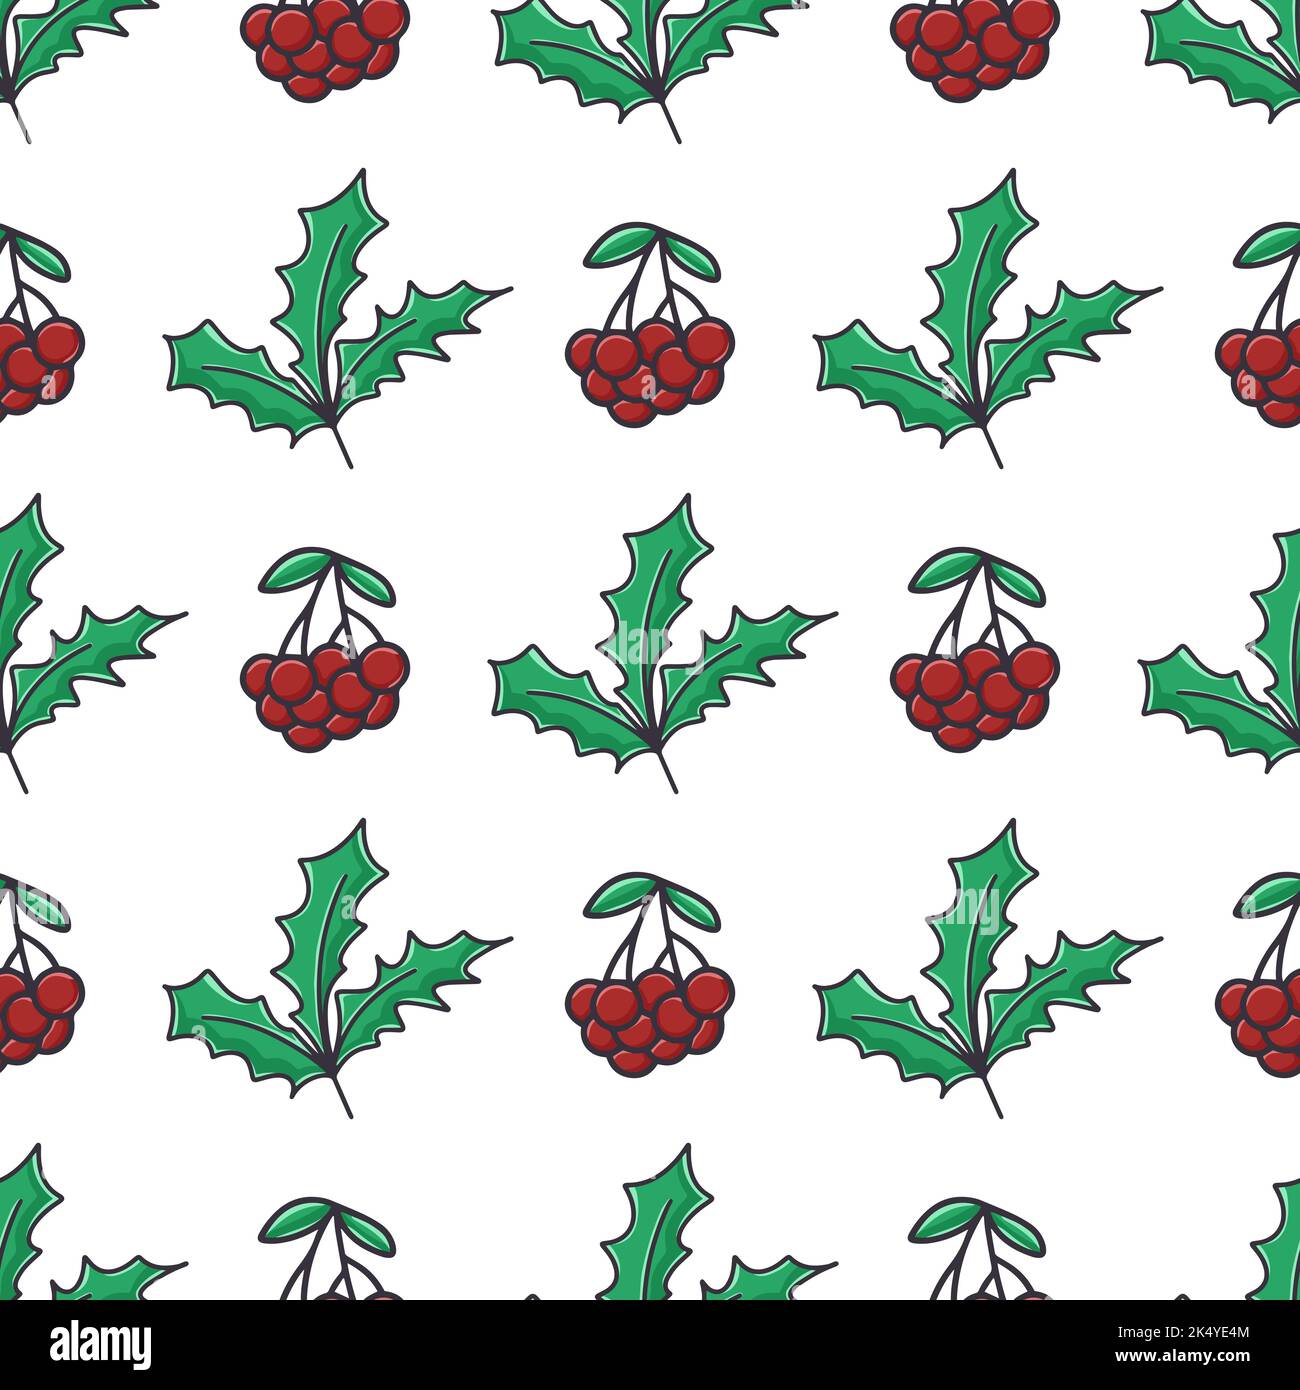 Digital paper rowan berry and holly vector illustration. Seamless botanical winter pattern. Berry leaf background for wallpaper, textile, package Stock Vector